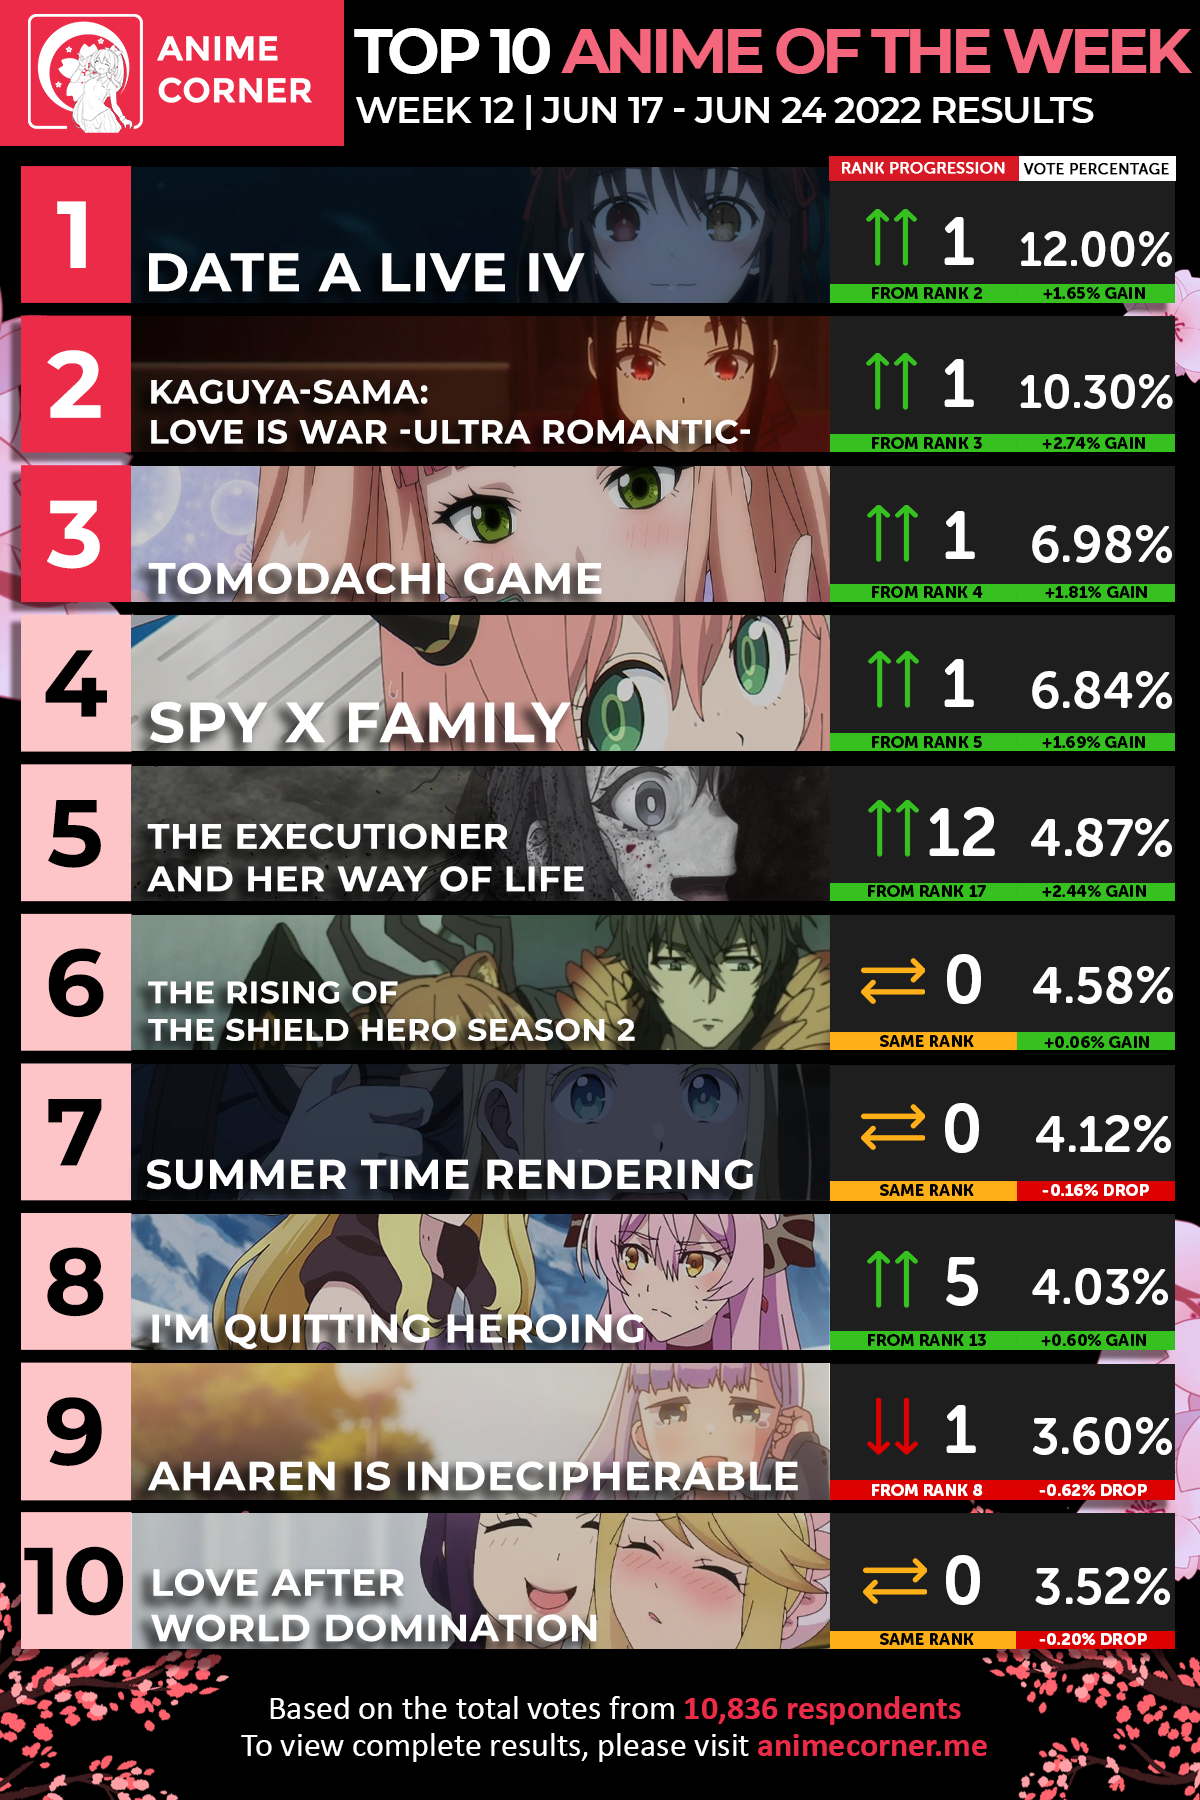 Top 10 Anime of the Week 12 Spring 2022